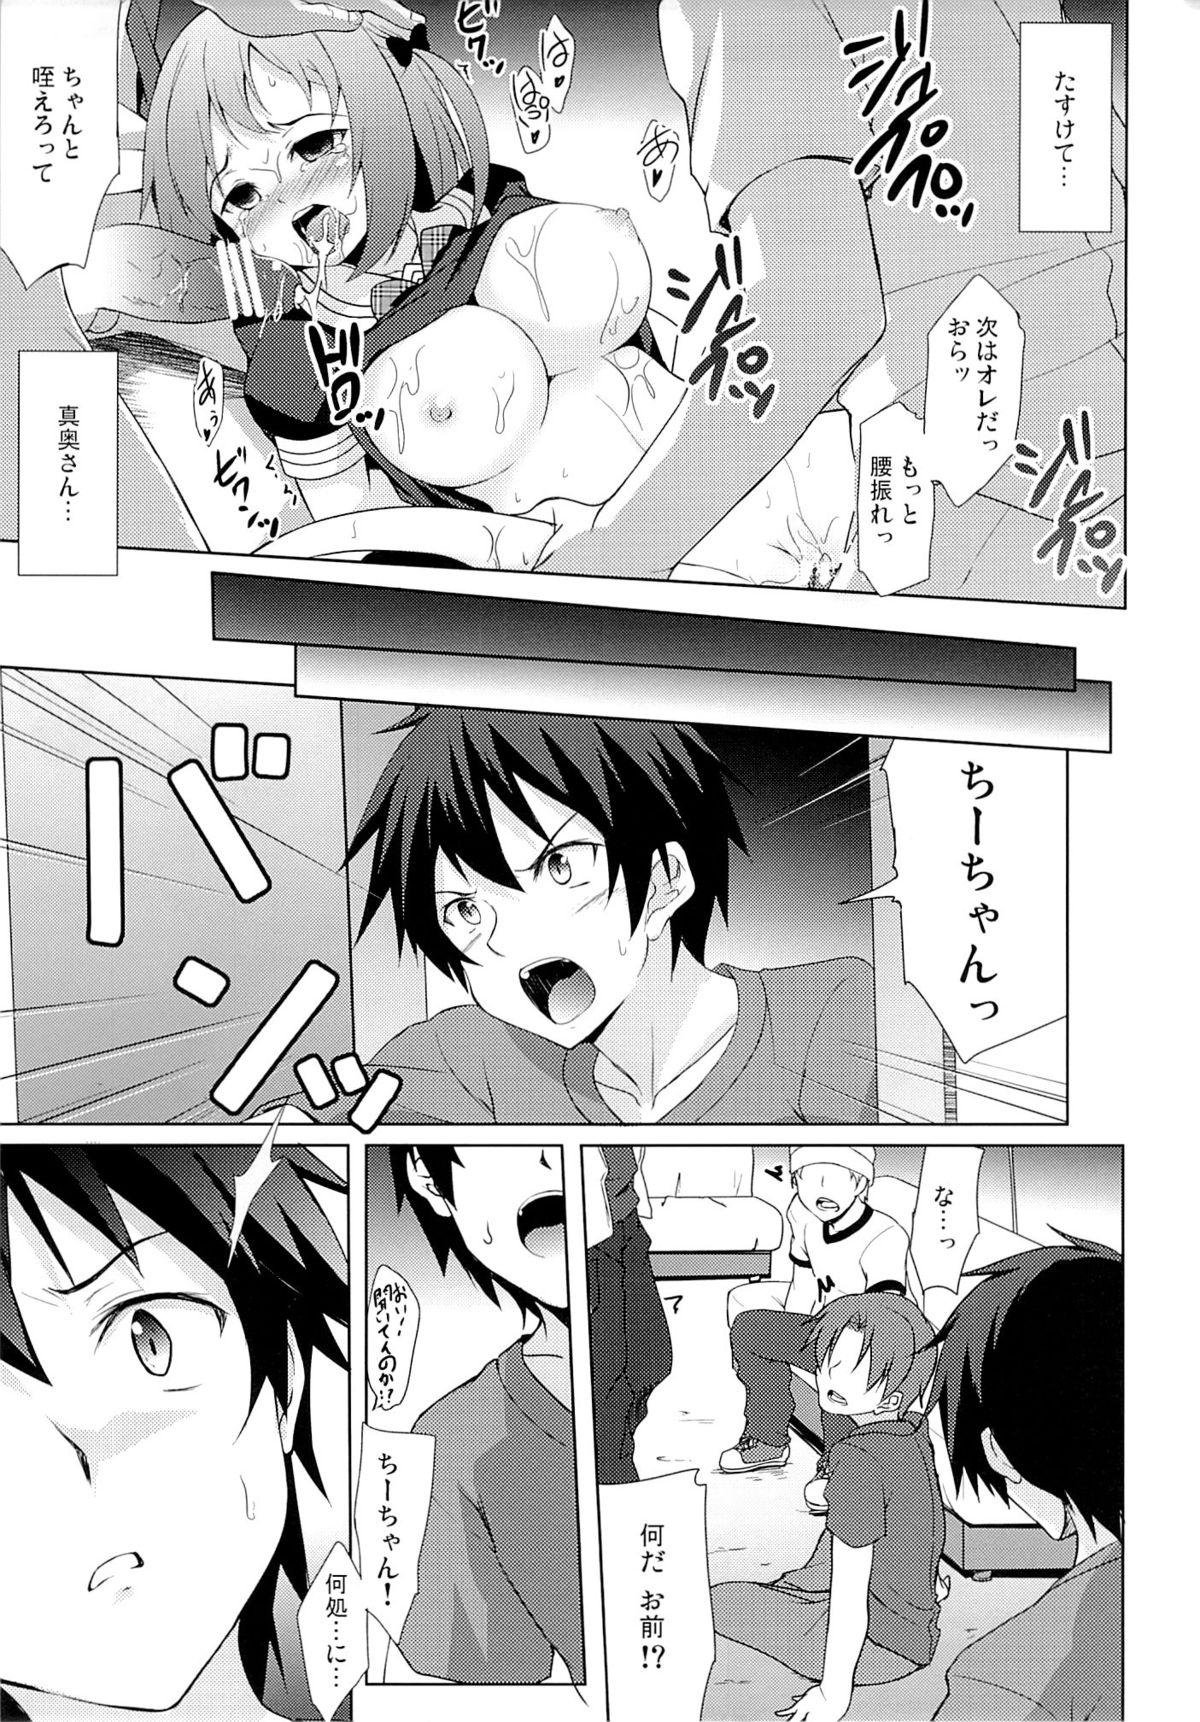 Chii-chan to Bad End. 16